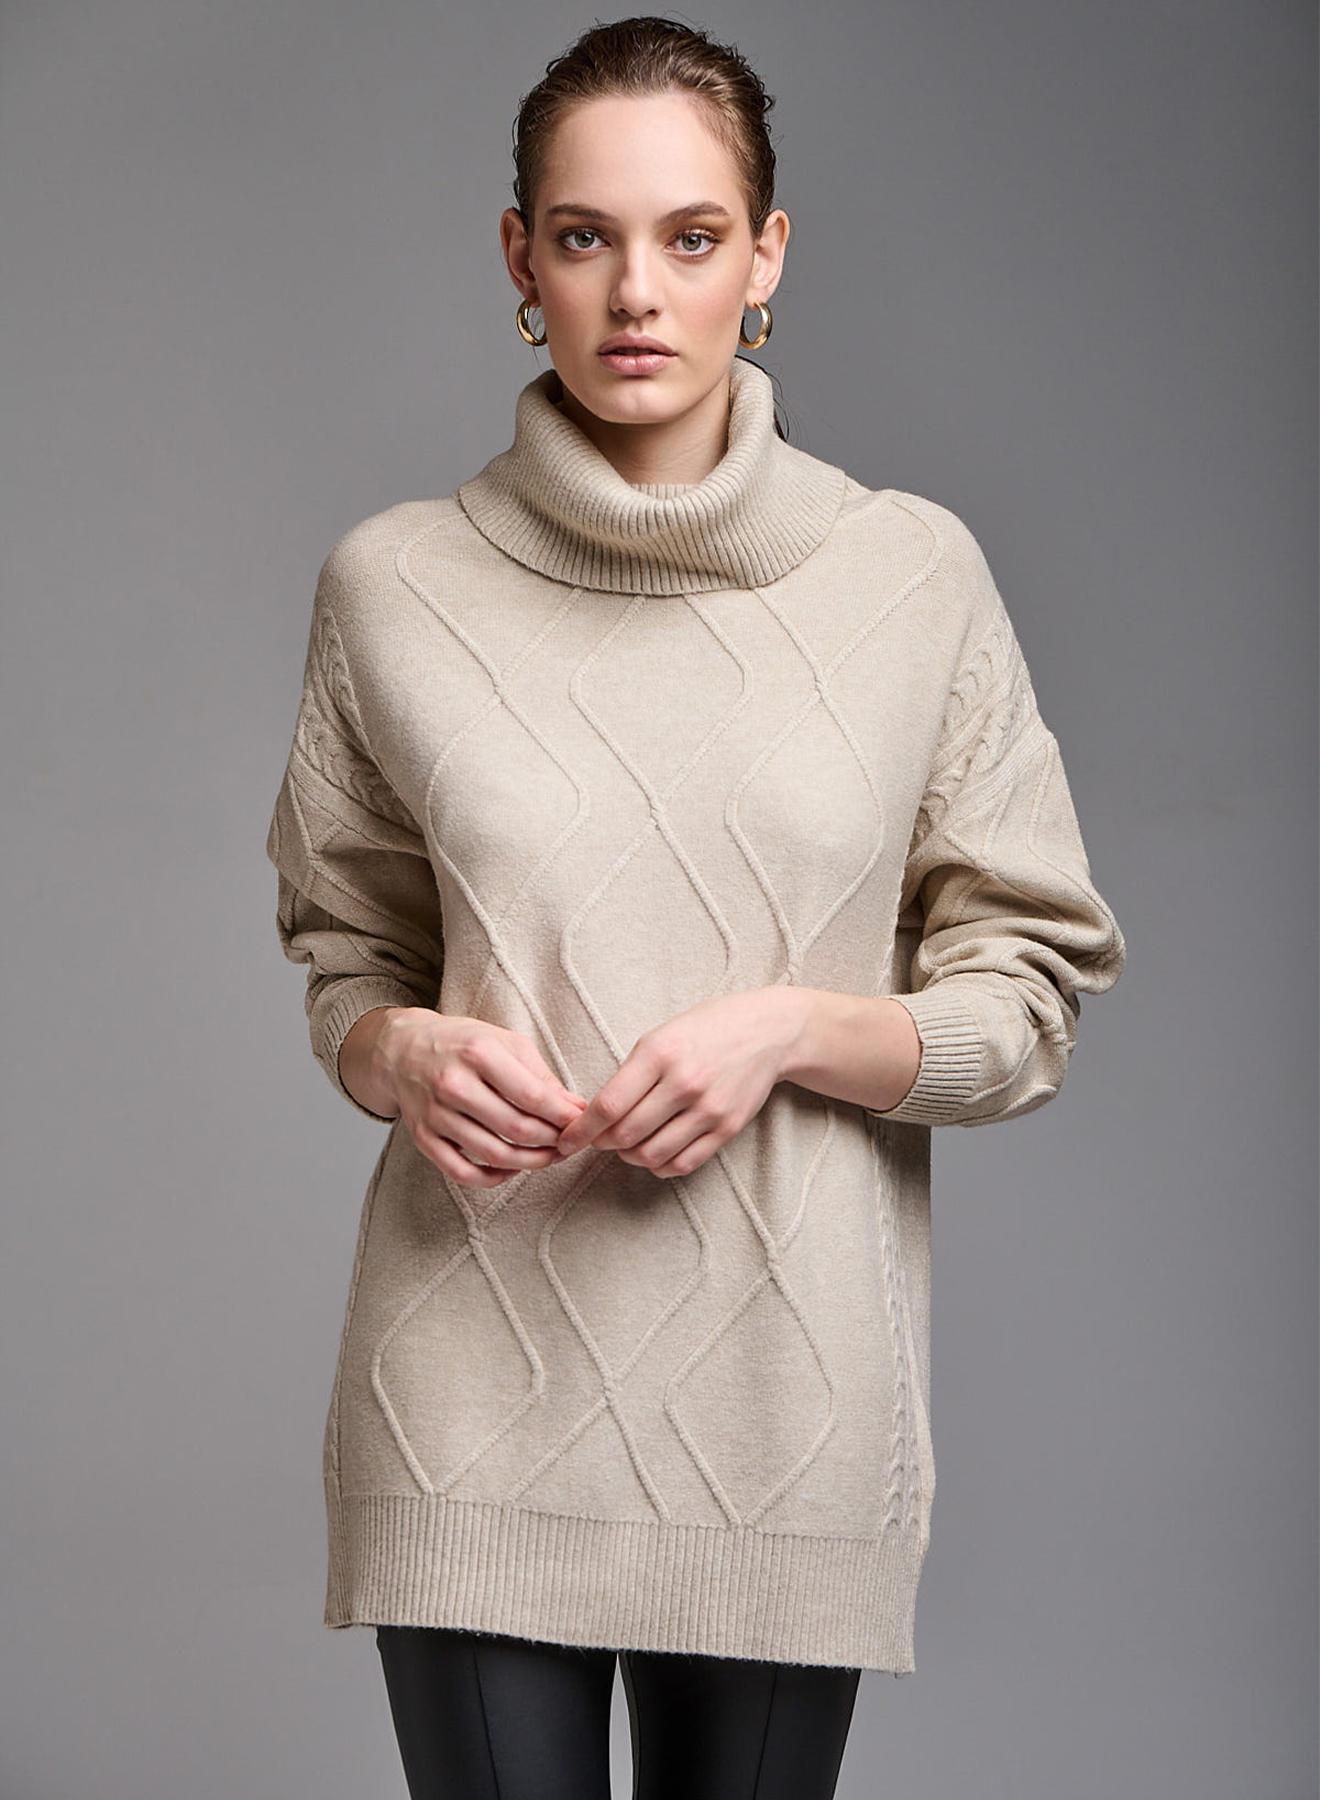 Turtleneck sweater with textured details - 3